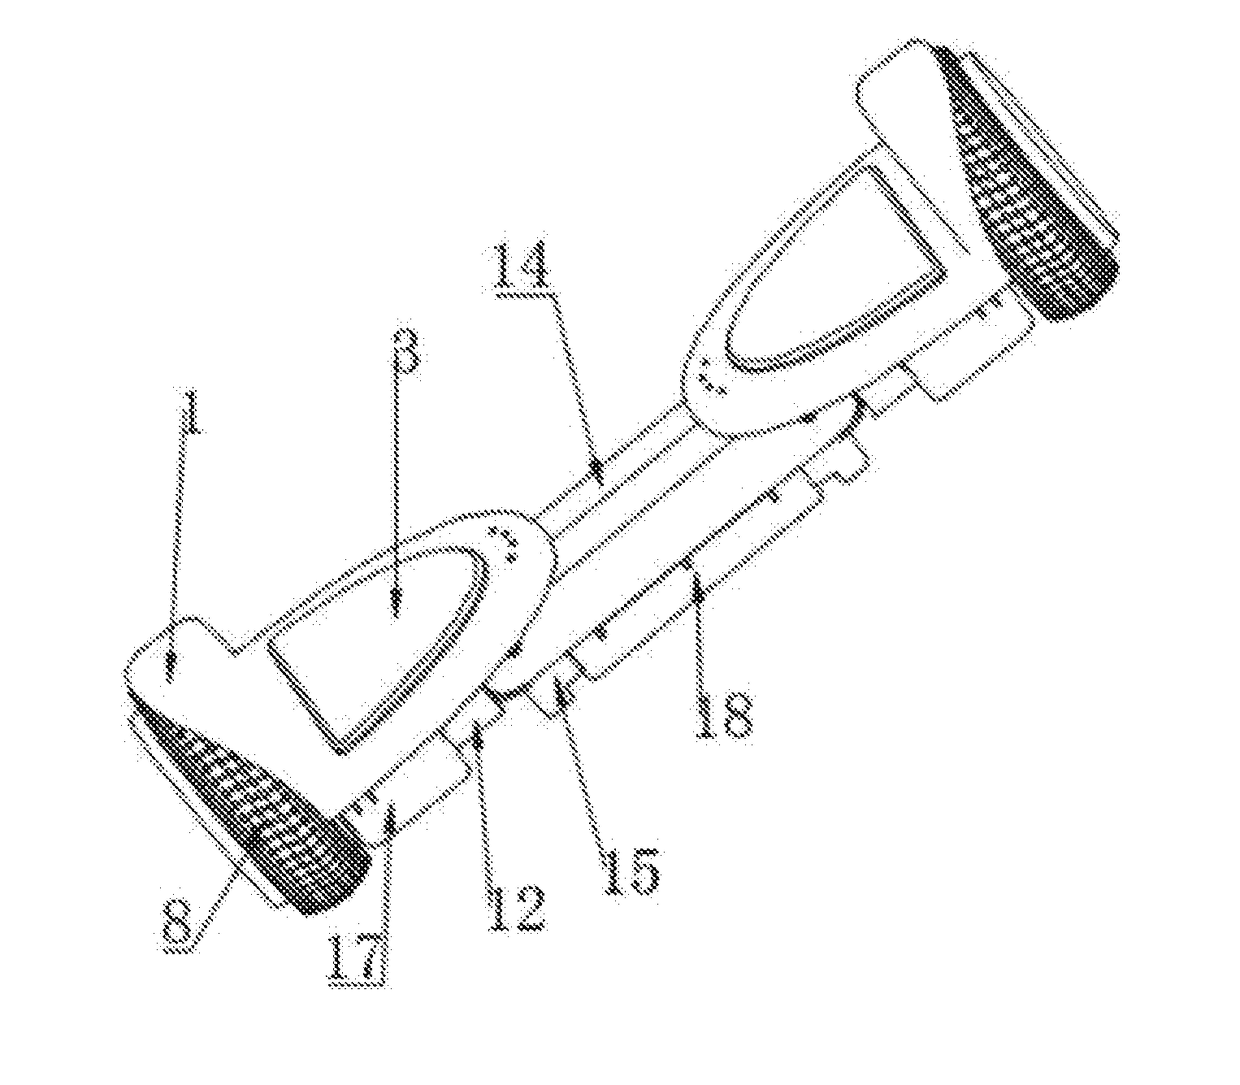 Two-axle vehicle balance scooter